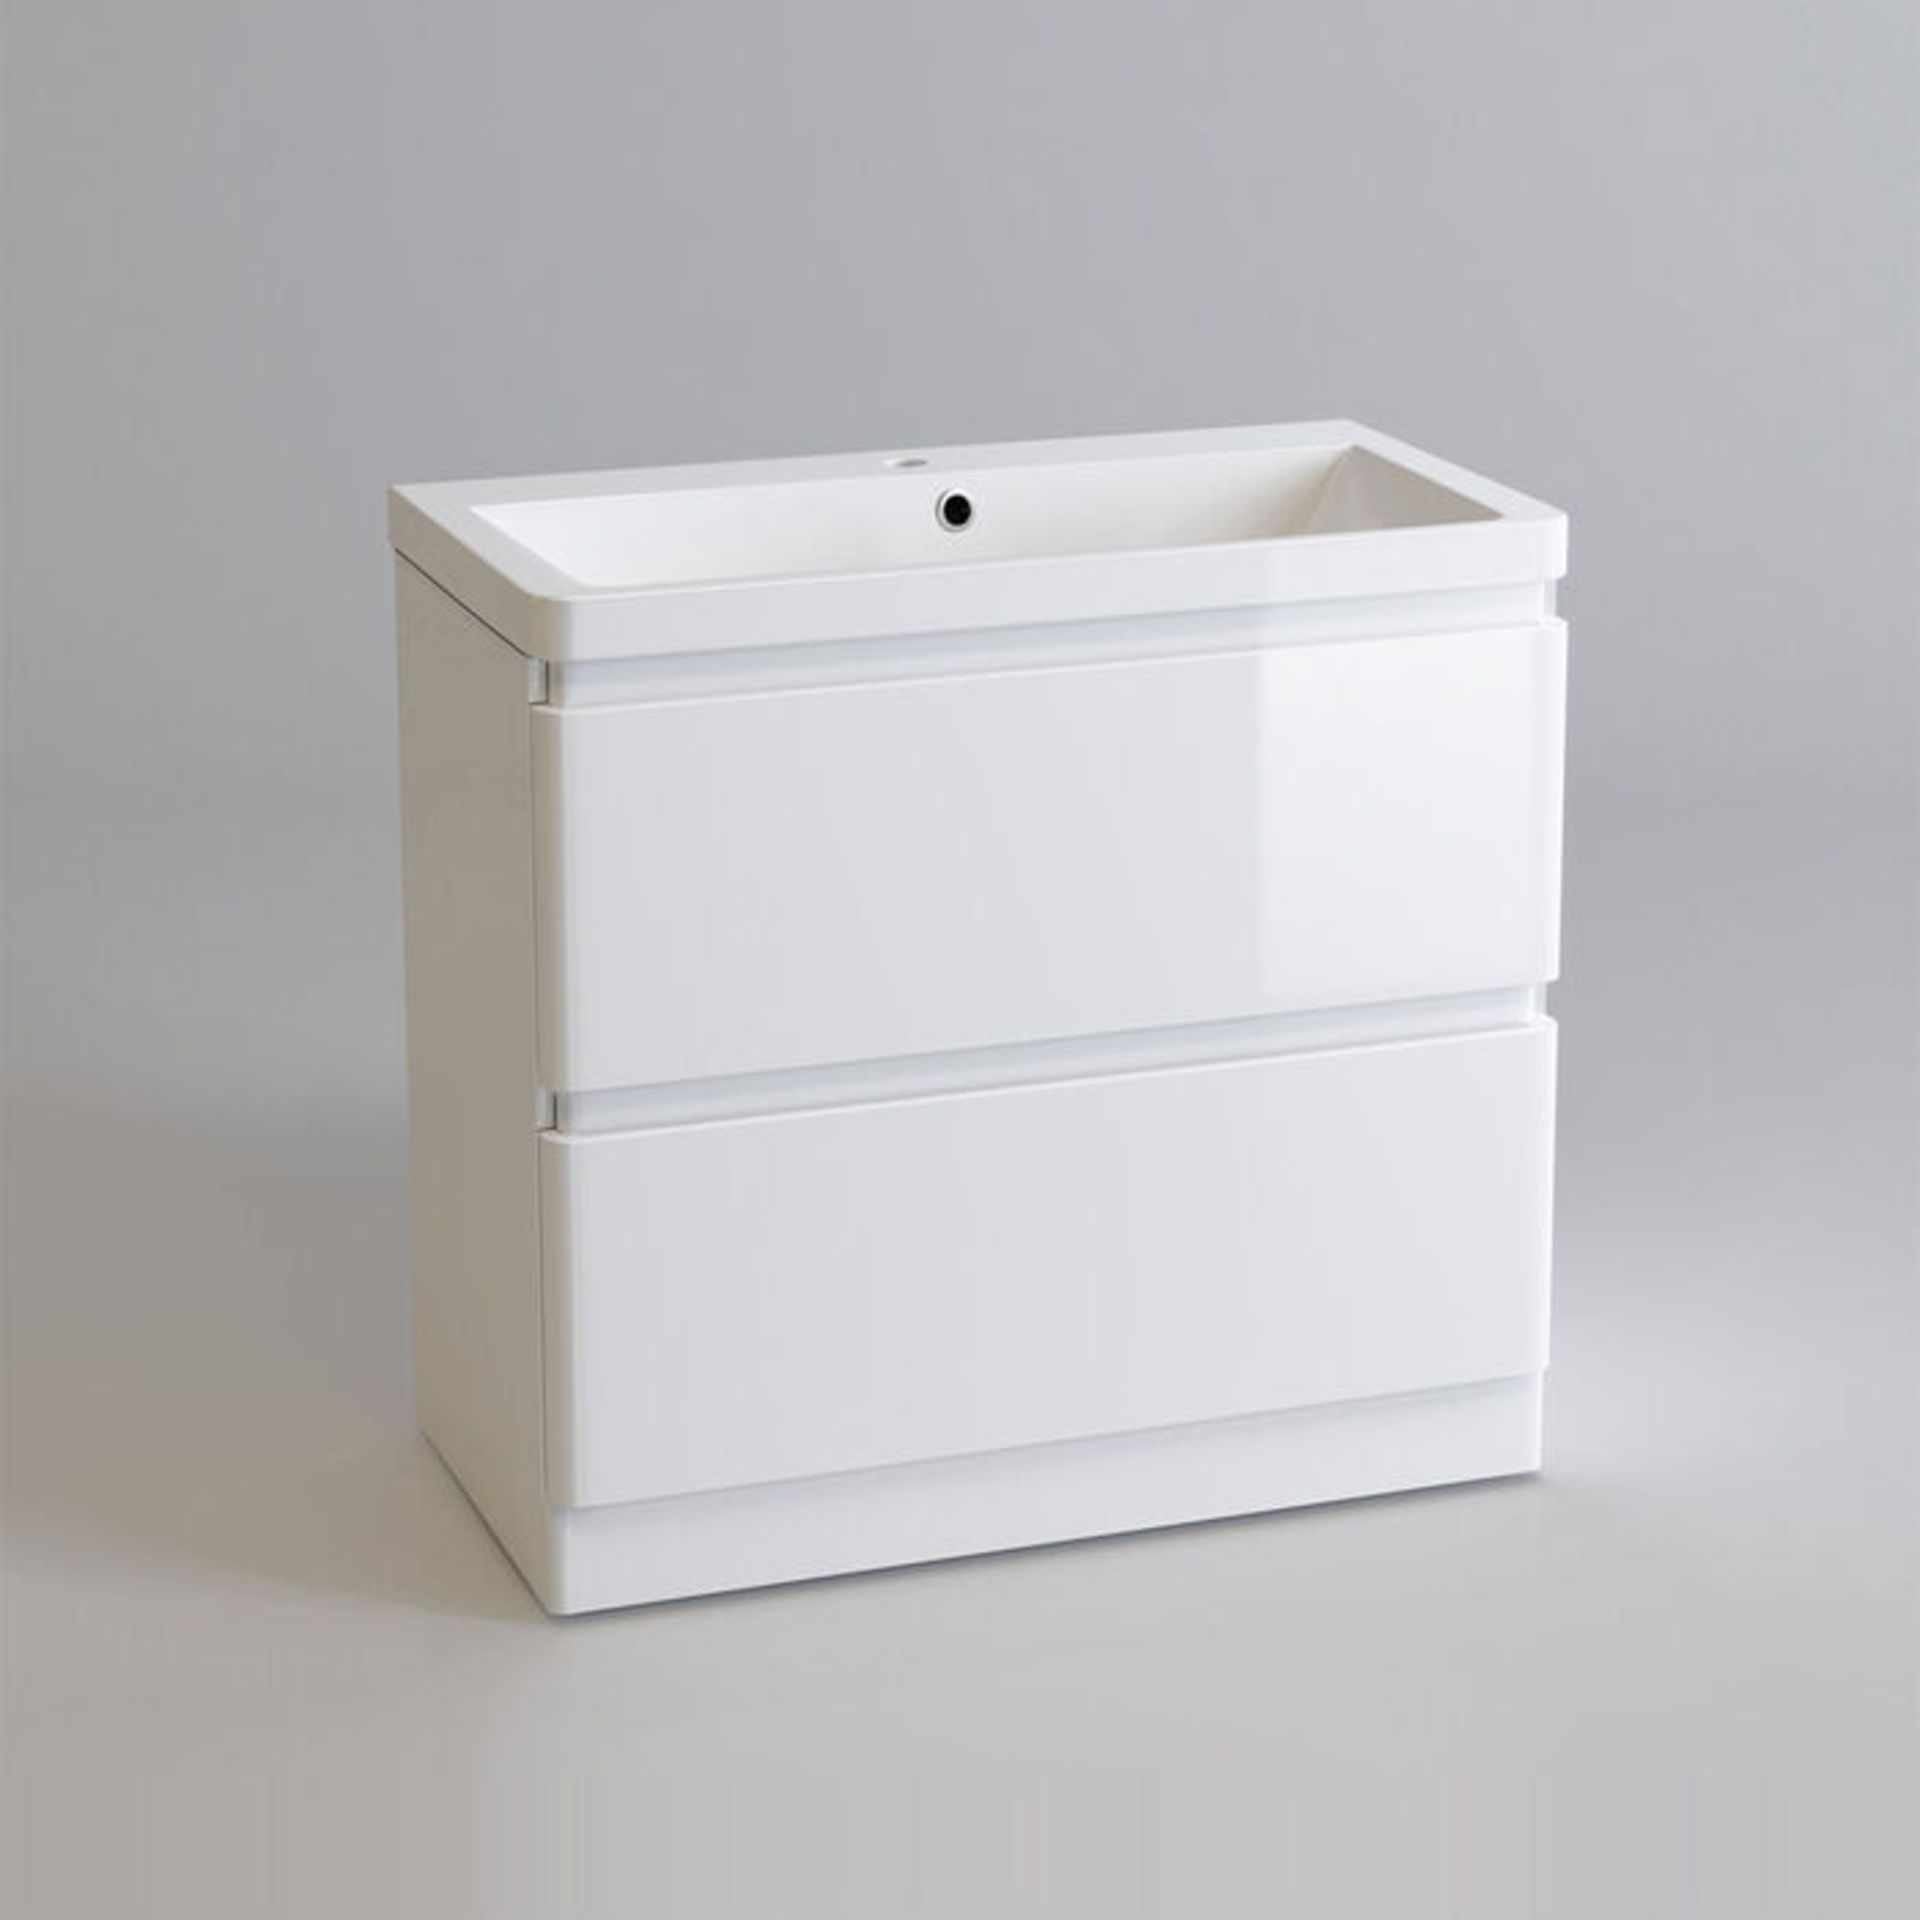 (PM29) 800mm Denver Gloss White Built In Sink Drawer Unit - Floor Standing. RRP £599.99. Comes... - Image 3 of 4